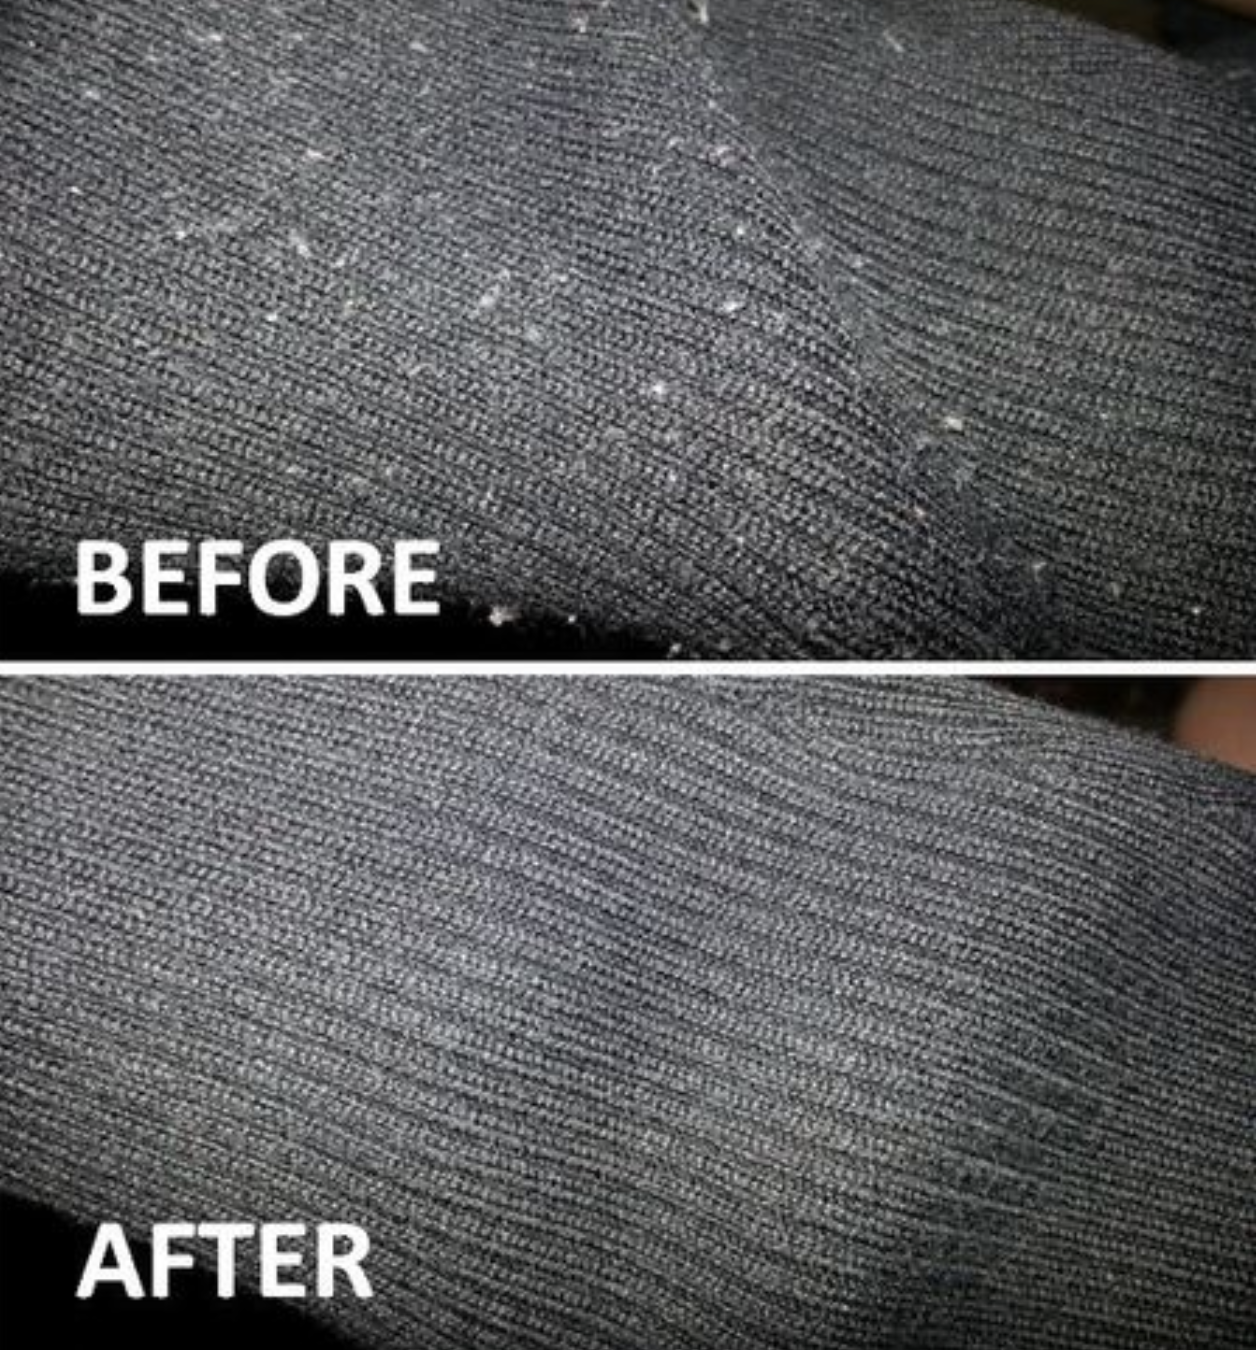 How To Get Stubborn Lint Off Clothes